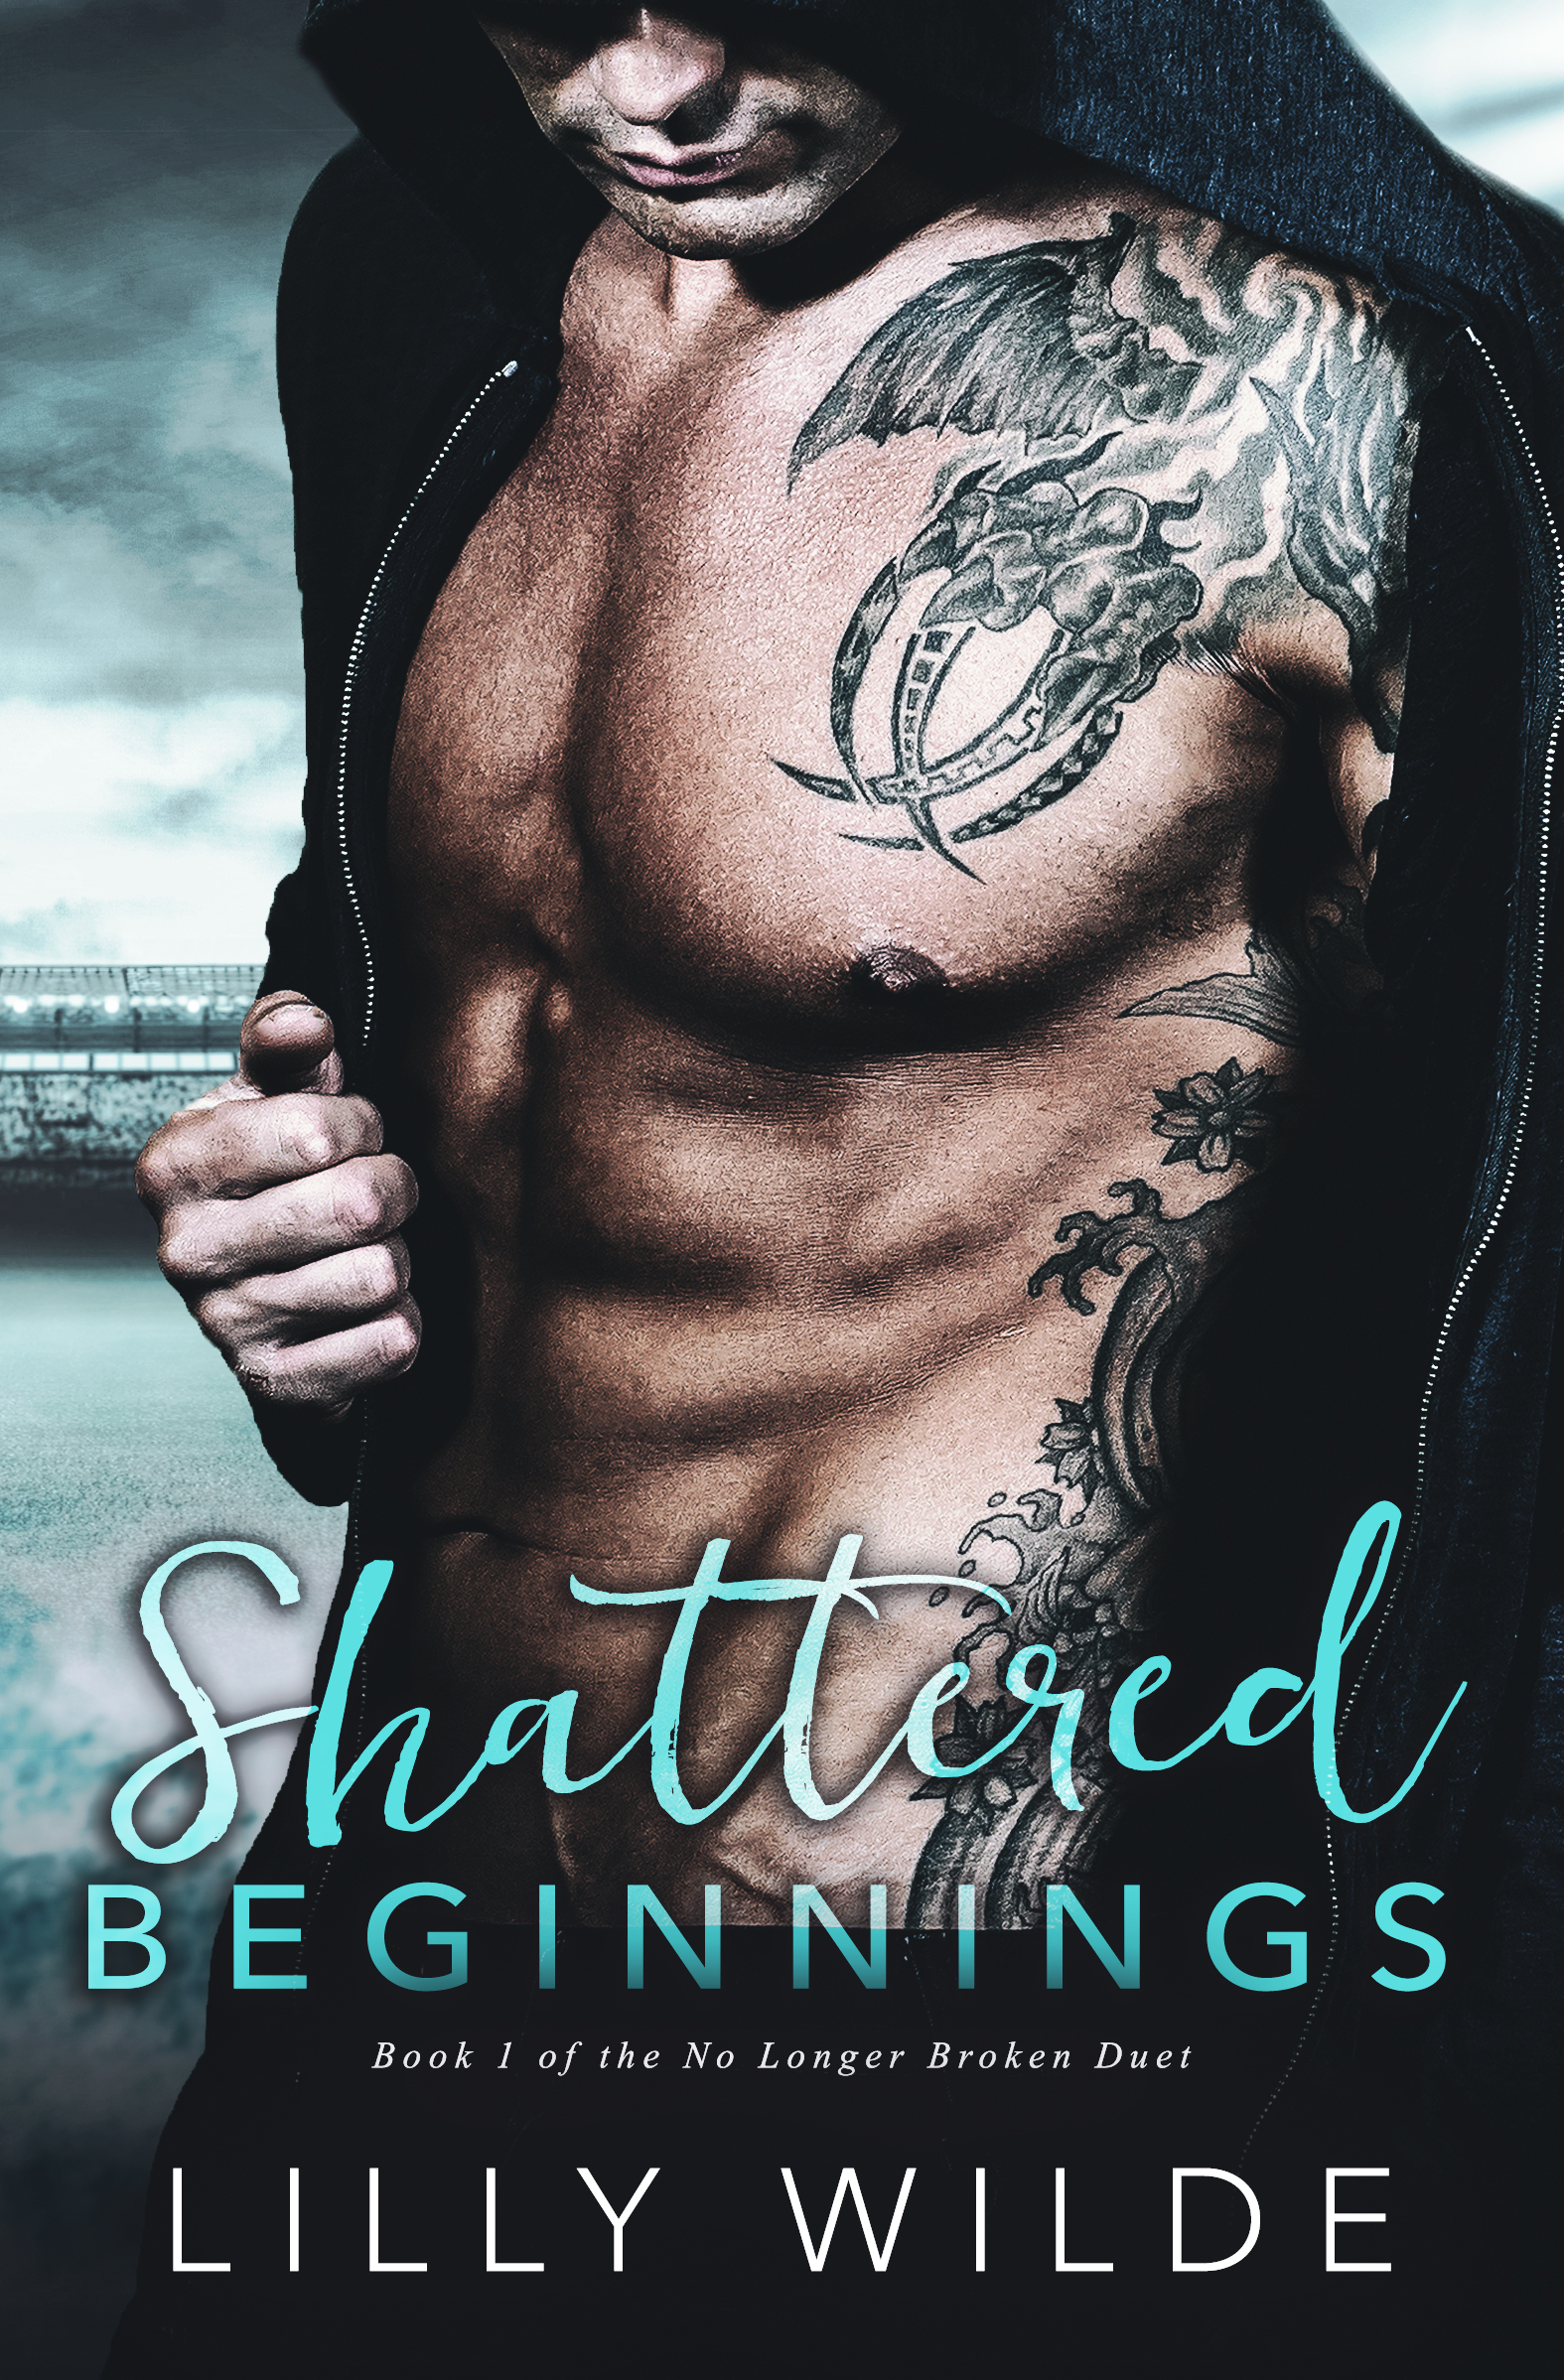 Shattered Beginnings by Lilly Wilde [Review]